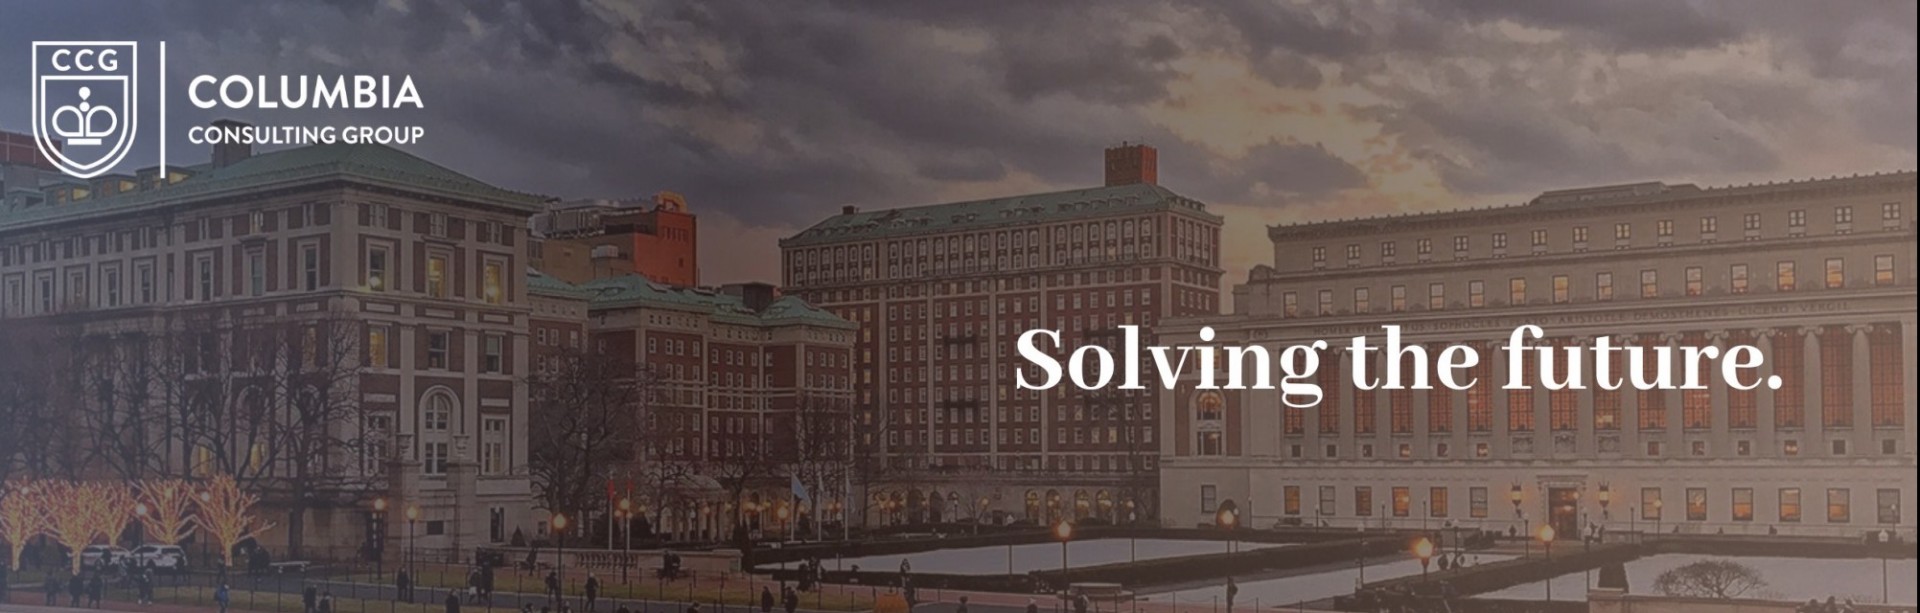 John Jay, Butler View, College Walk - Columbia Consulting Group - Columbia University